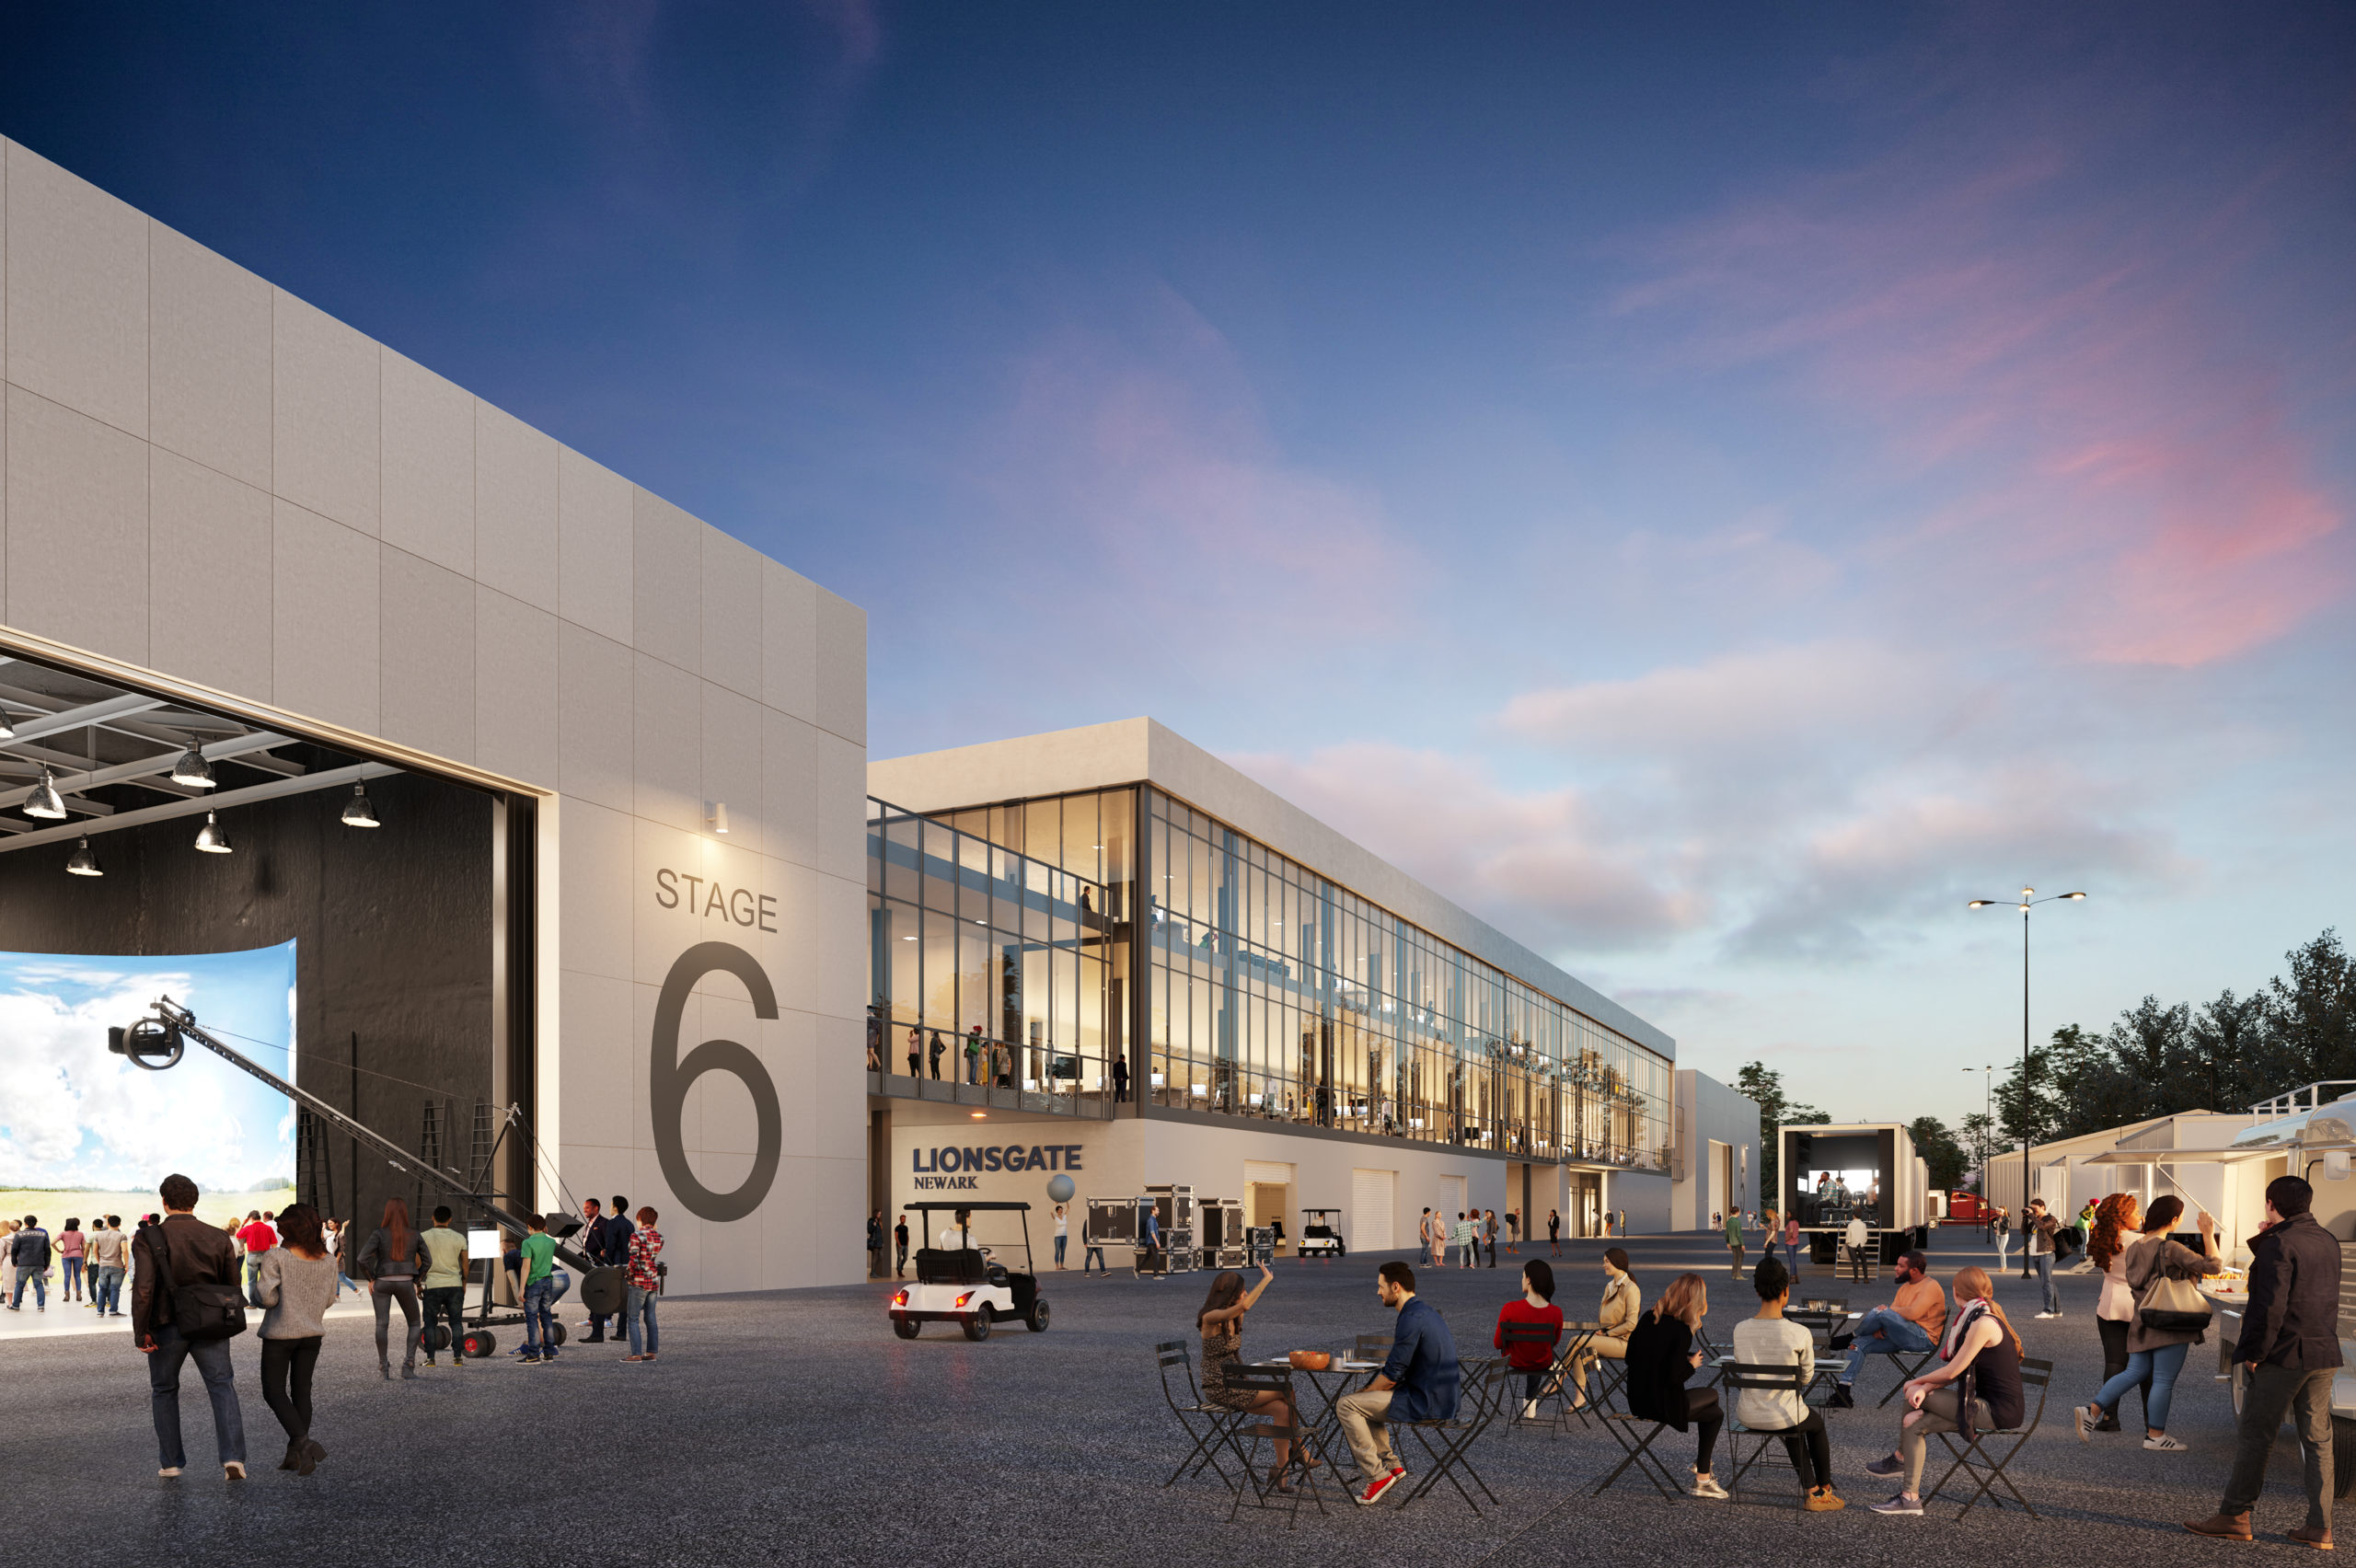 Street-level rendering of Lionsgate's new studio and production facility in Newark, New Jersey - Courtesy of Great Point Studios